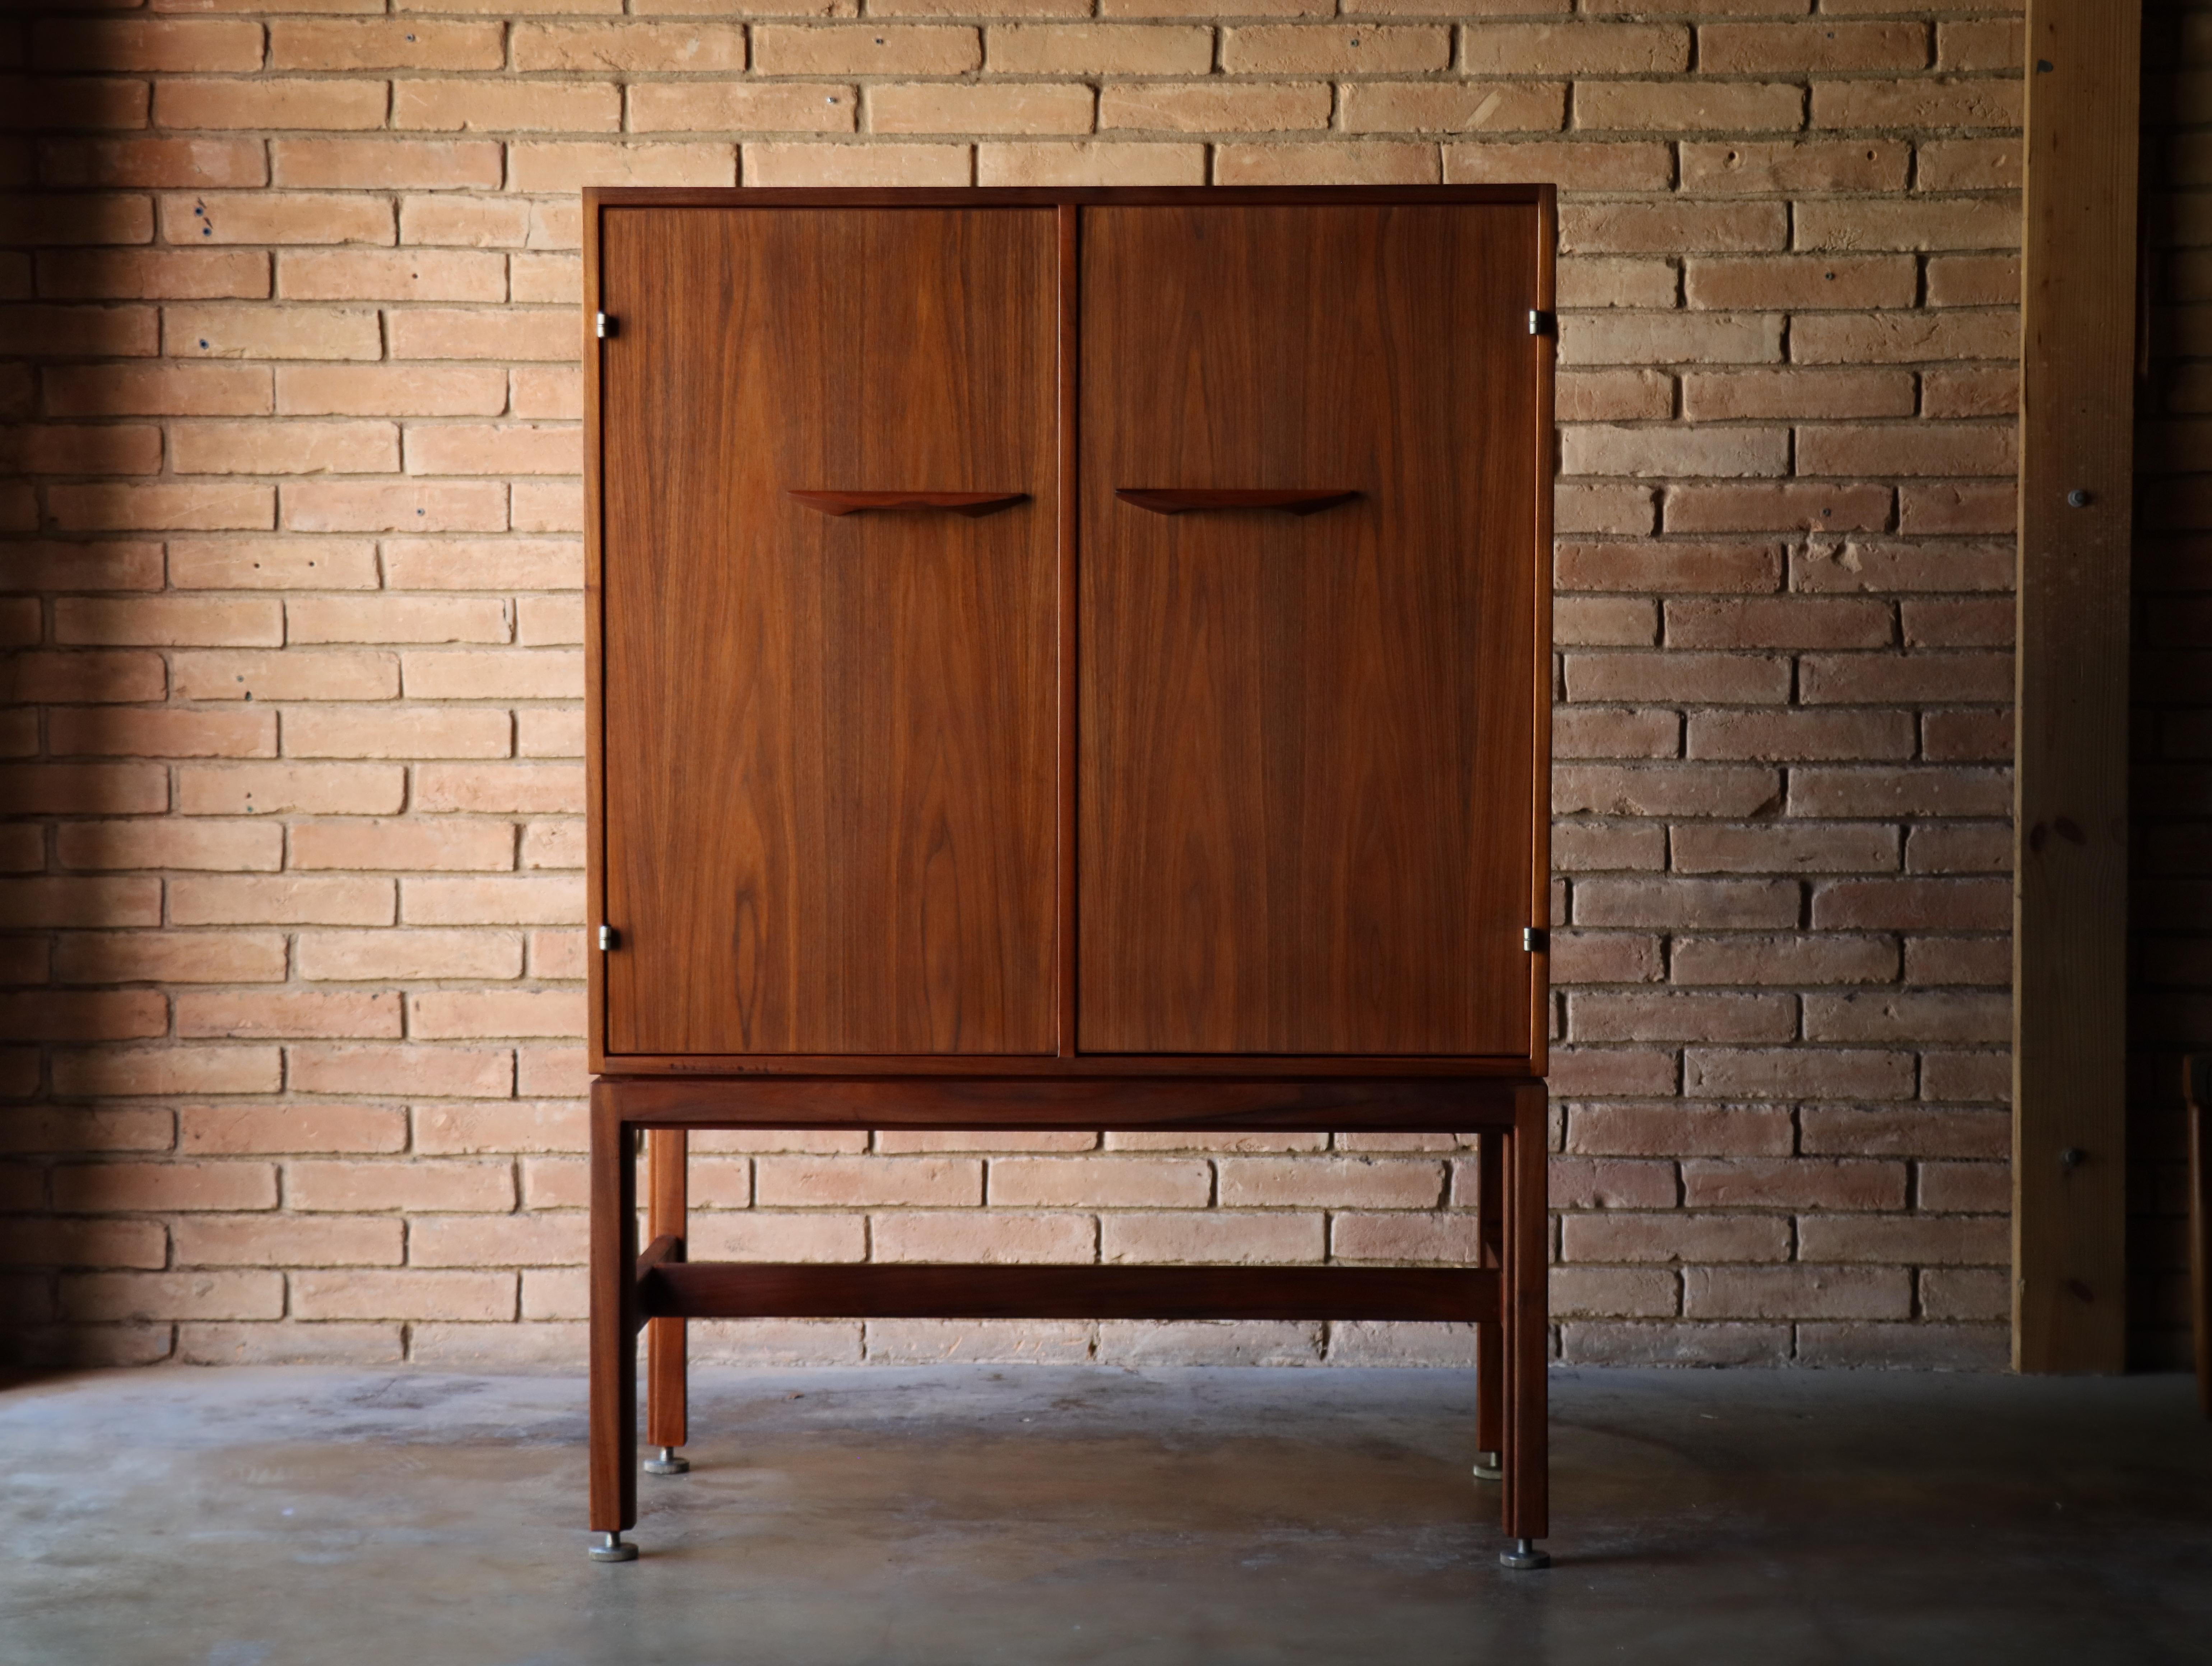 Beautiful and uncommon walnut cabinet designed by Jens Risom, 1960s. 

This particular design can be used in a number of different usages. Perhaps originally deigned to be a linen cabinet, it would also serve well as a bar cabinet, home office or to